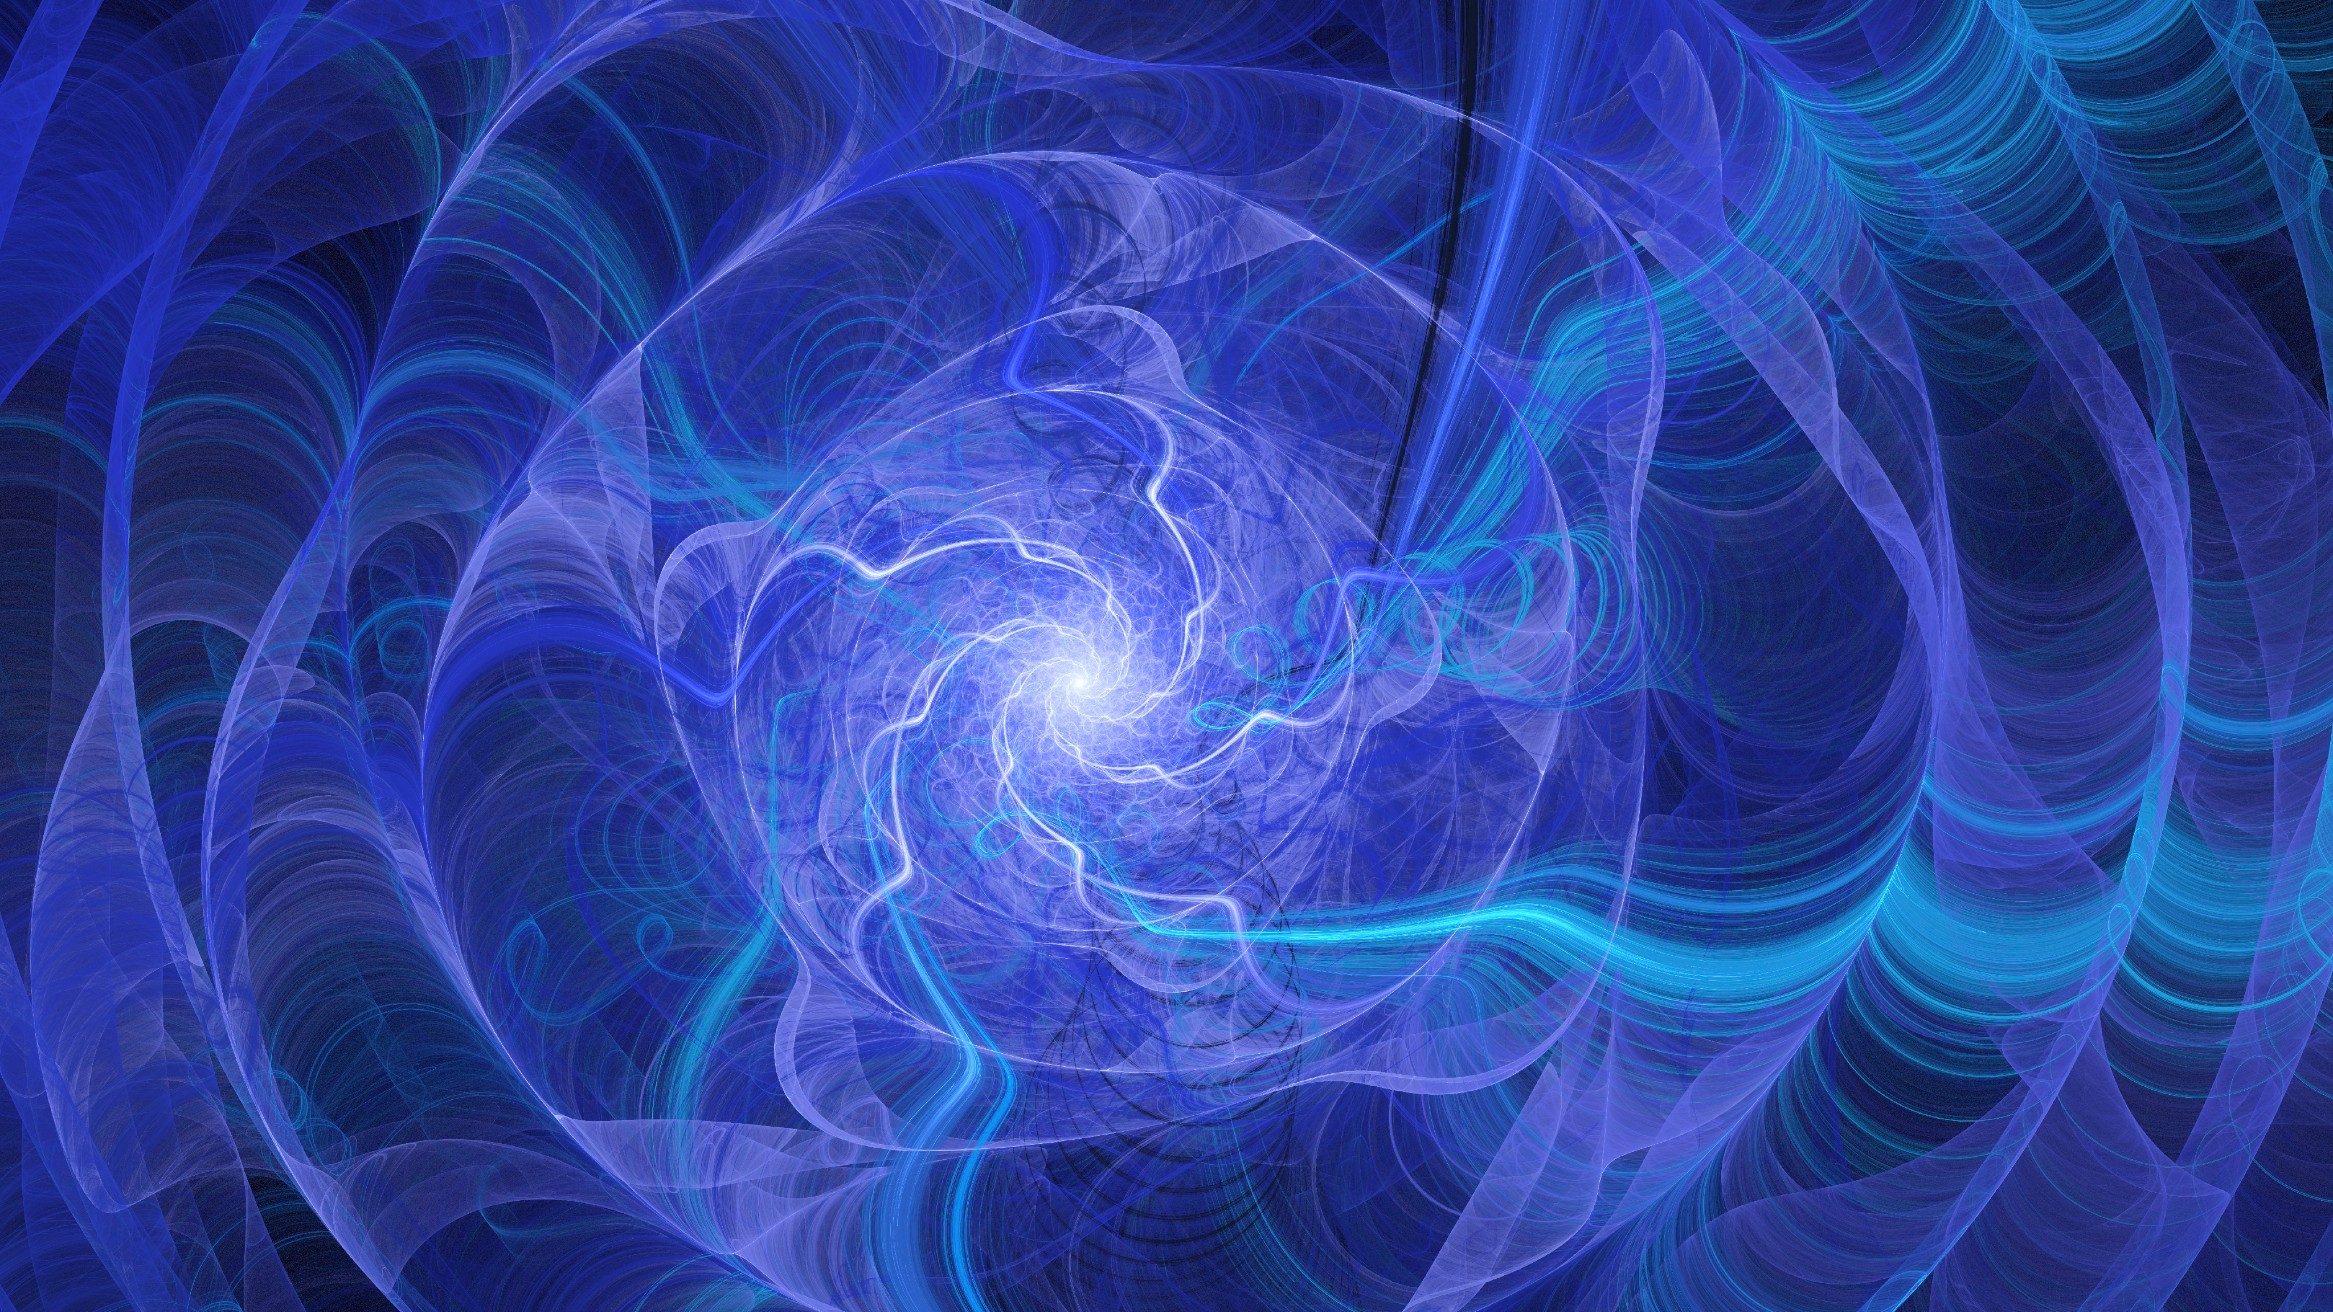 Circular blue and violet swirls of light distorted as they expand from the bright center to illustrate string theory conceptually.